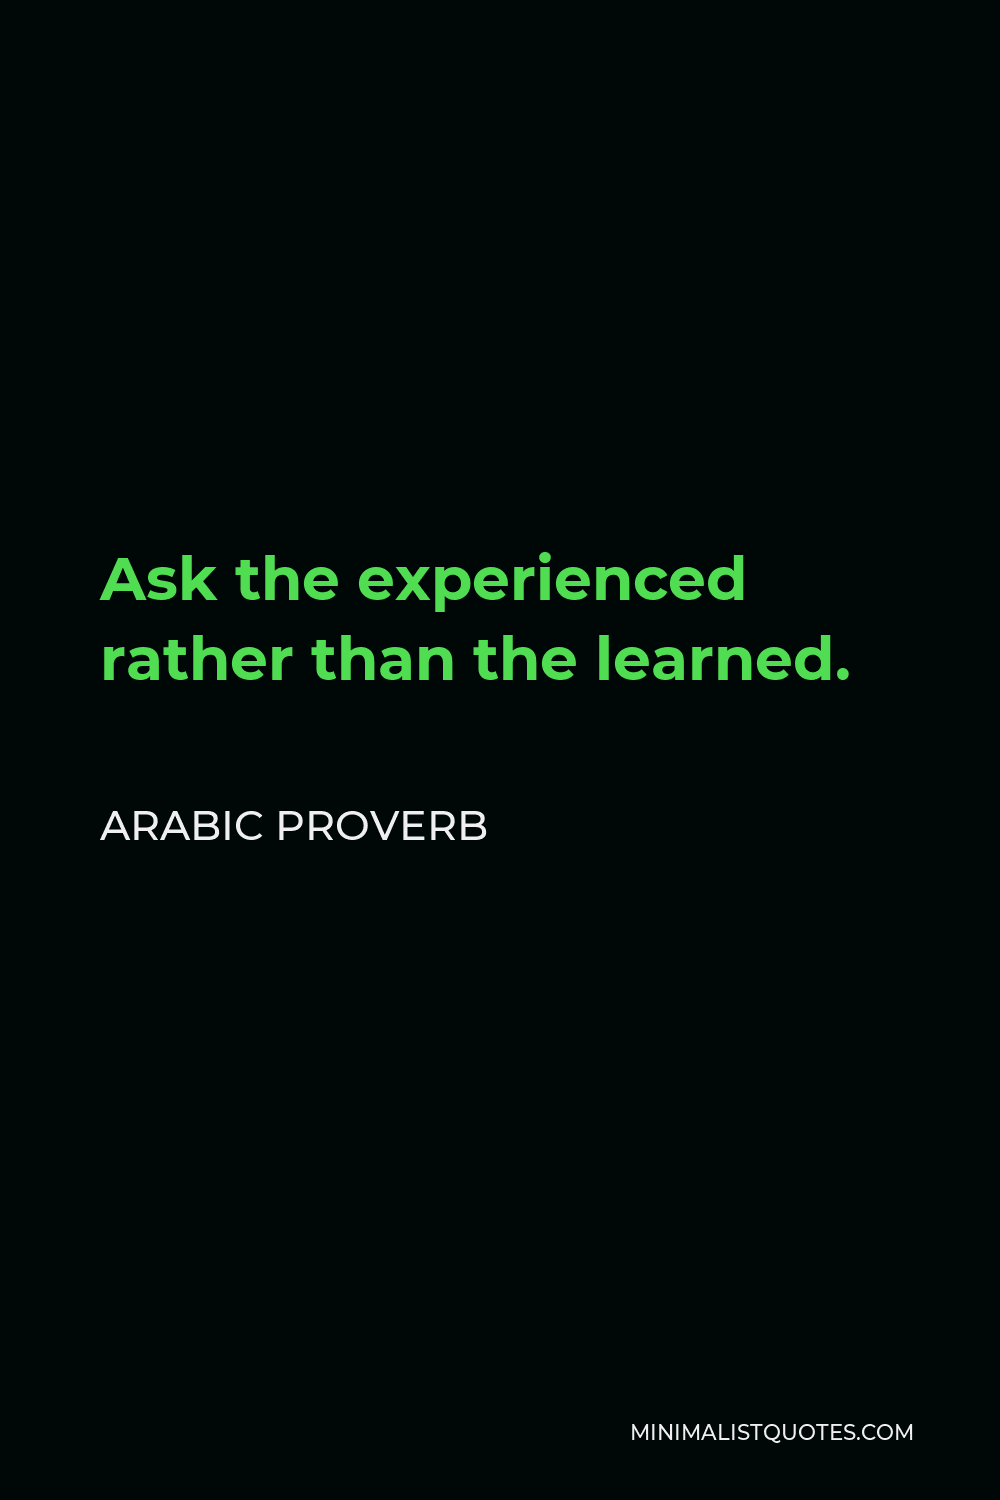 Arabic Proverb Quote - Ask the experienced rather than the learned.